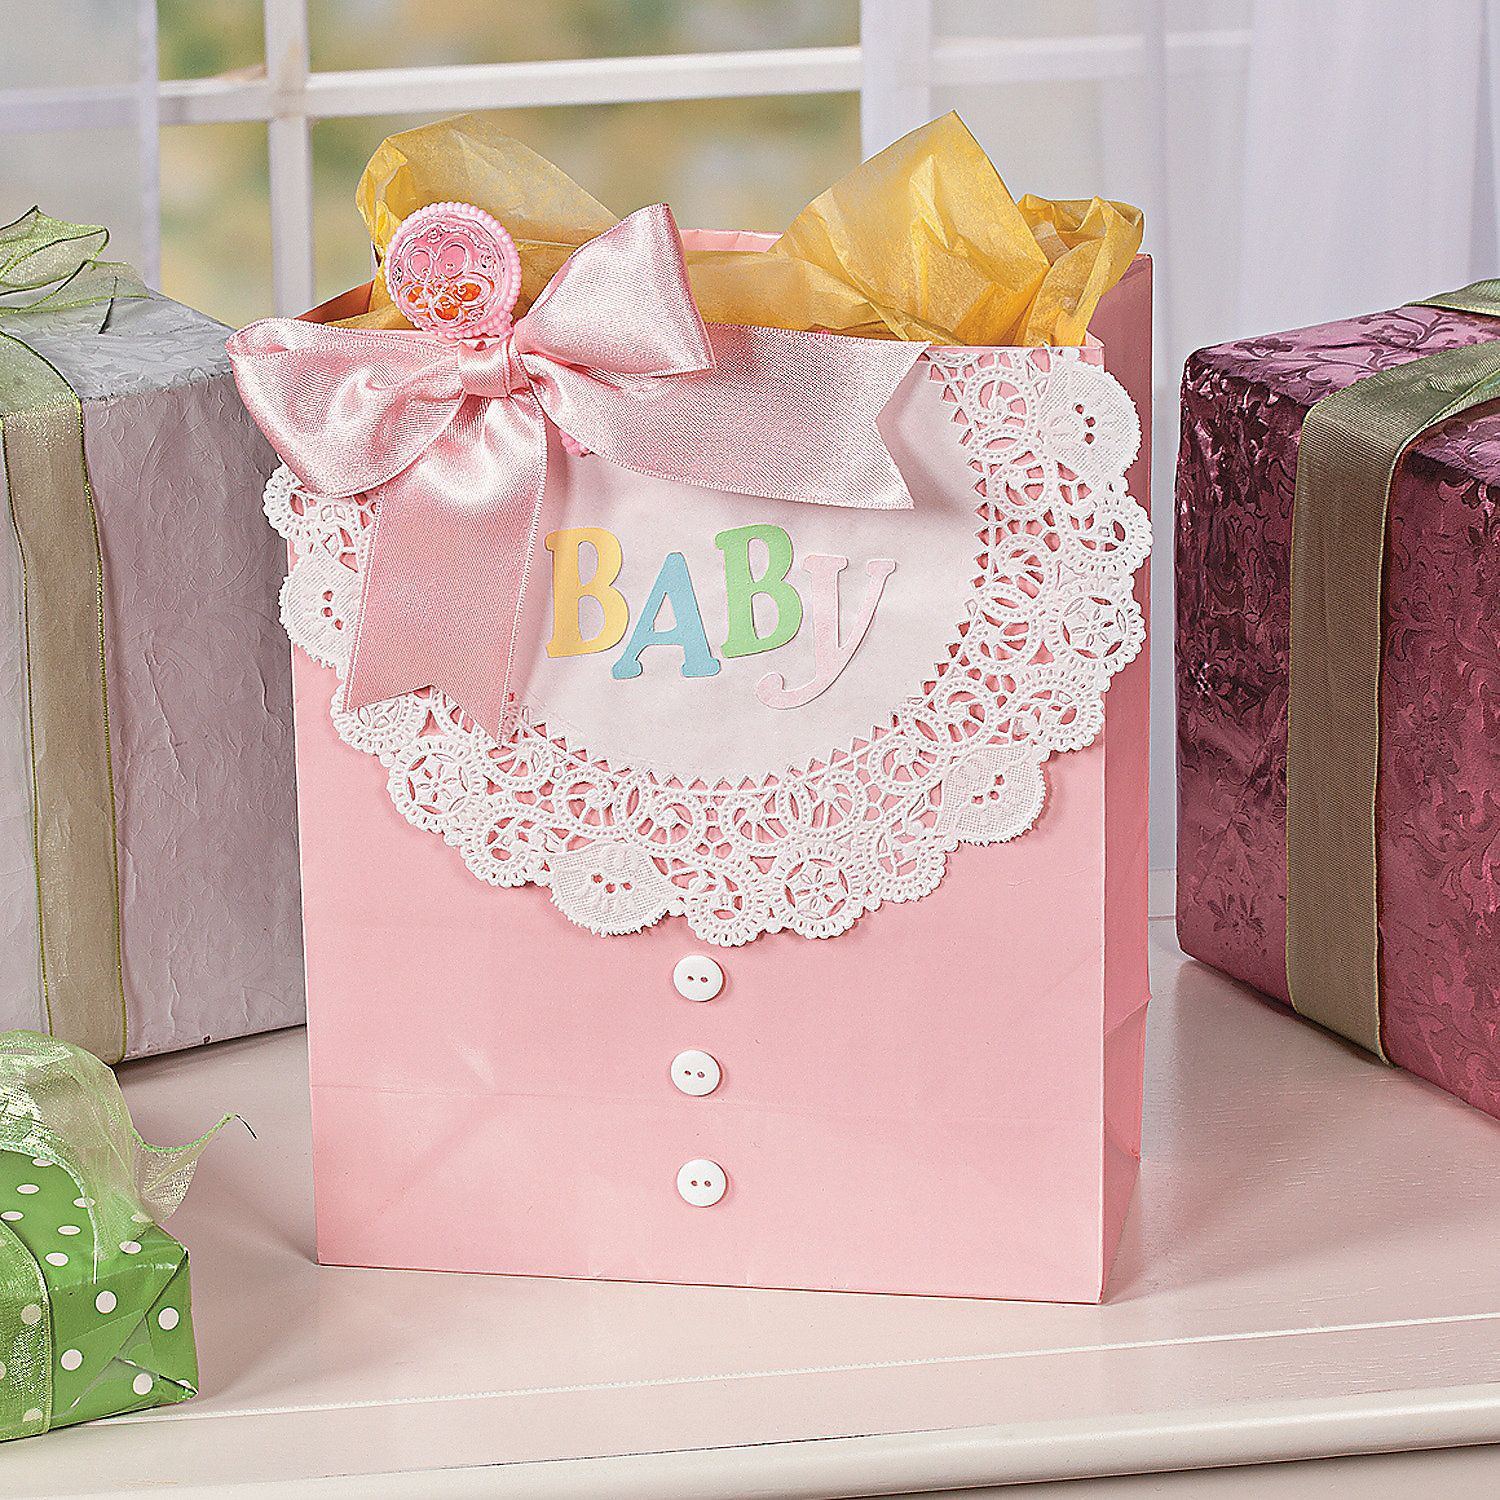 Baby Shower Gift Bags Ideas
 Baby Gift Bag OrientalTrading